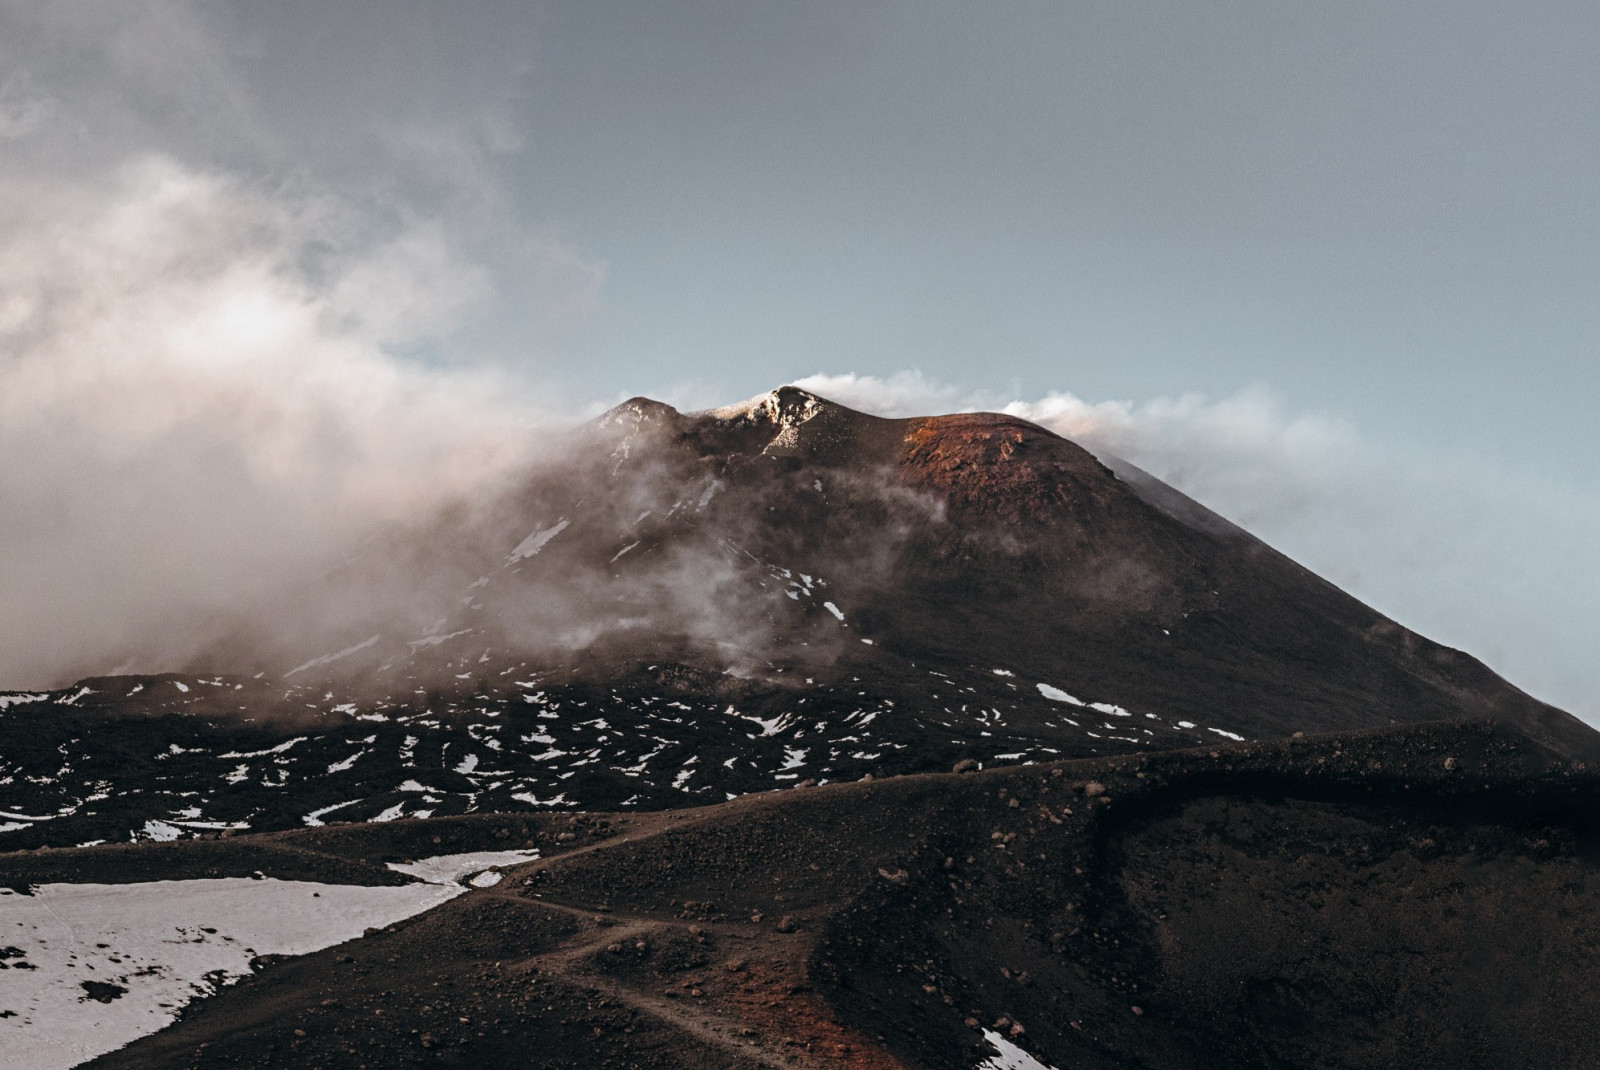 slightly snow-capped Mount Etna partially covered by clouds